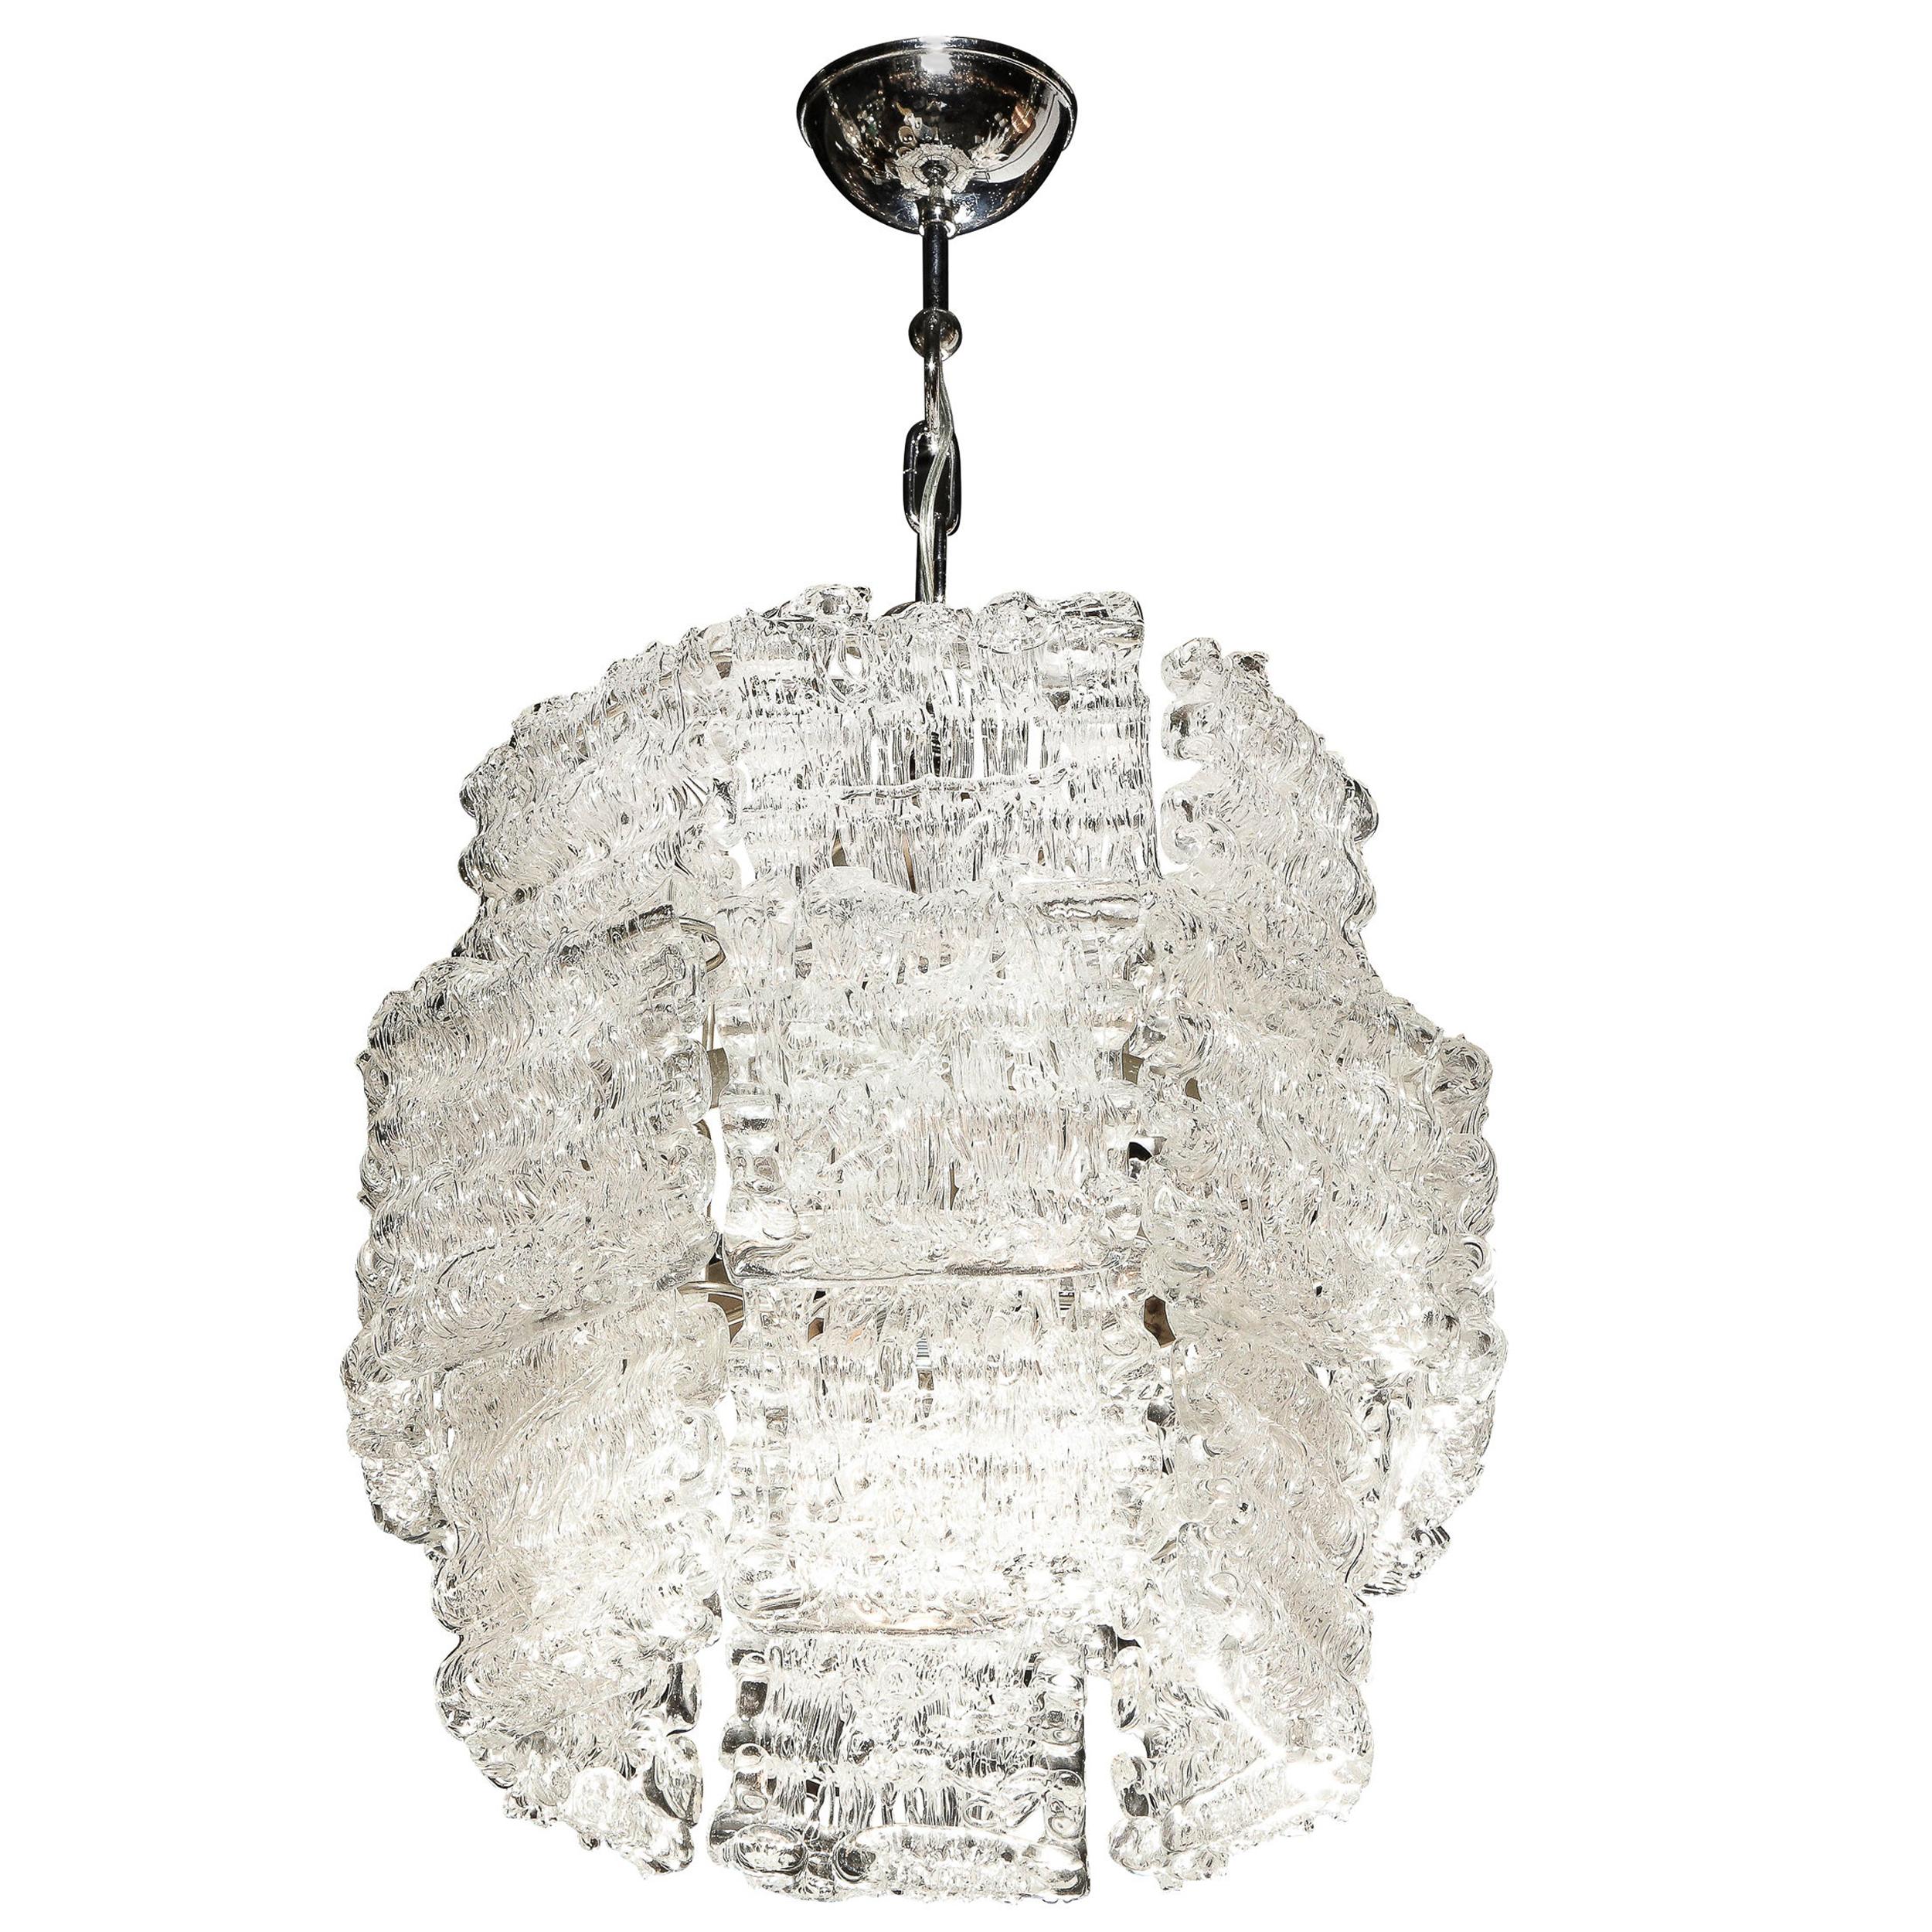 Mid-Century Modern Textured Translucent Glass Chandelier with Chrome Fittings For Sale